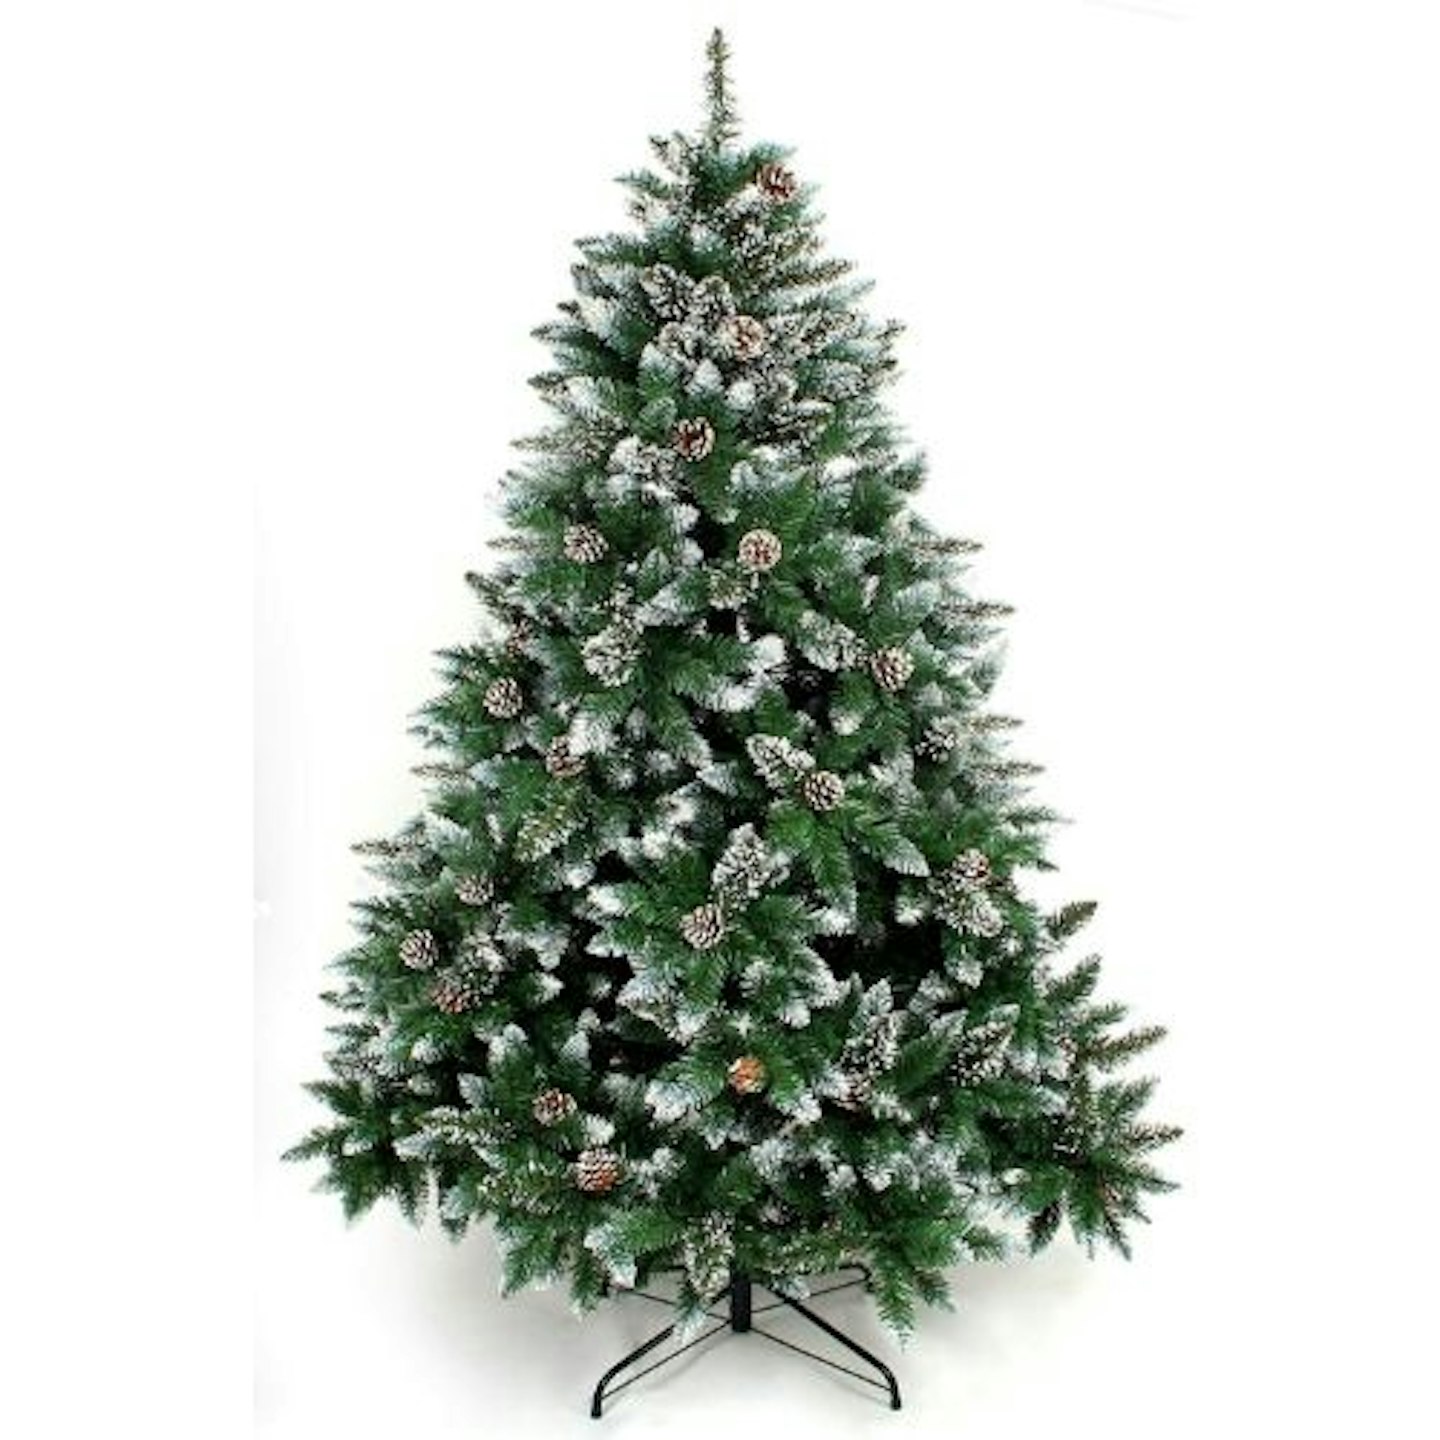 Best artificial Christmas trees Yorbay 5ft 150cm Artificial Christmas Tree